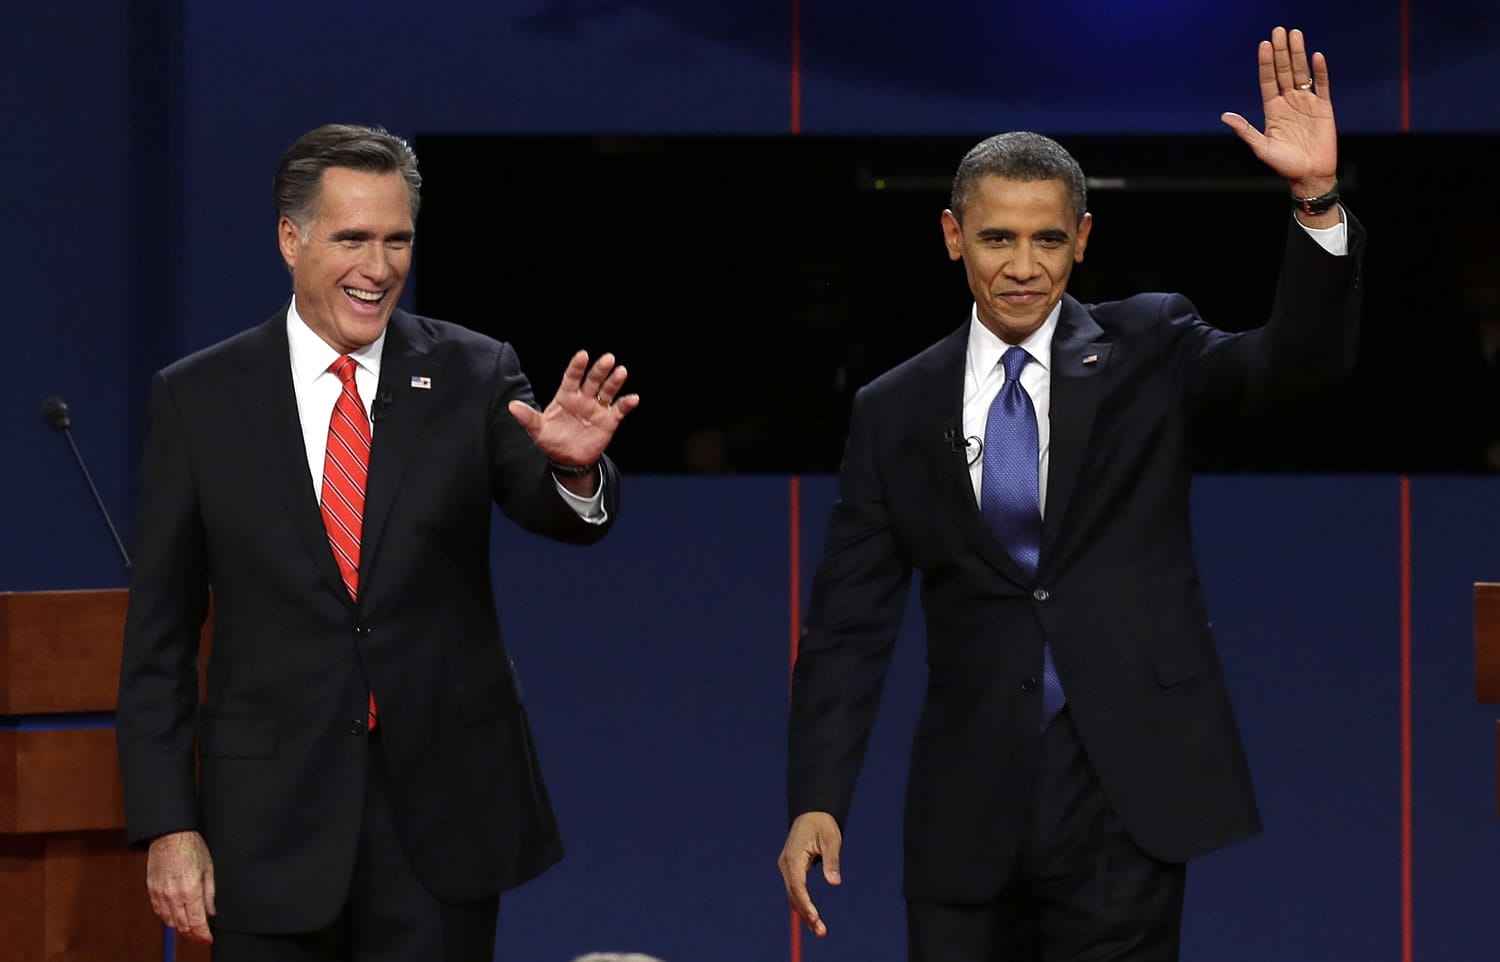 The sixth &quot;town hall&quot; style presidential debate will bring Republican presidential candidate Mitt Romney and President Barack Obama to Hofstra University on New Yorkis Long Island tonight.